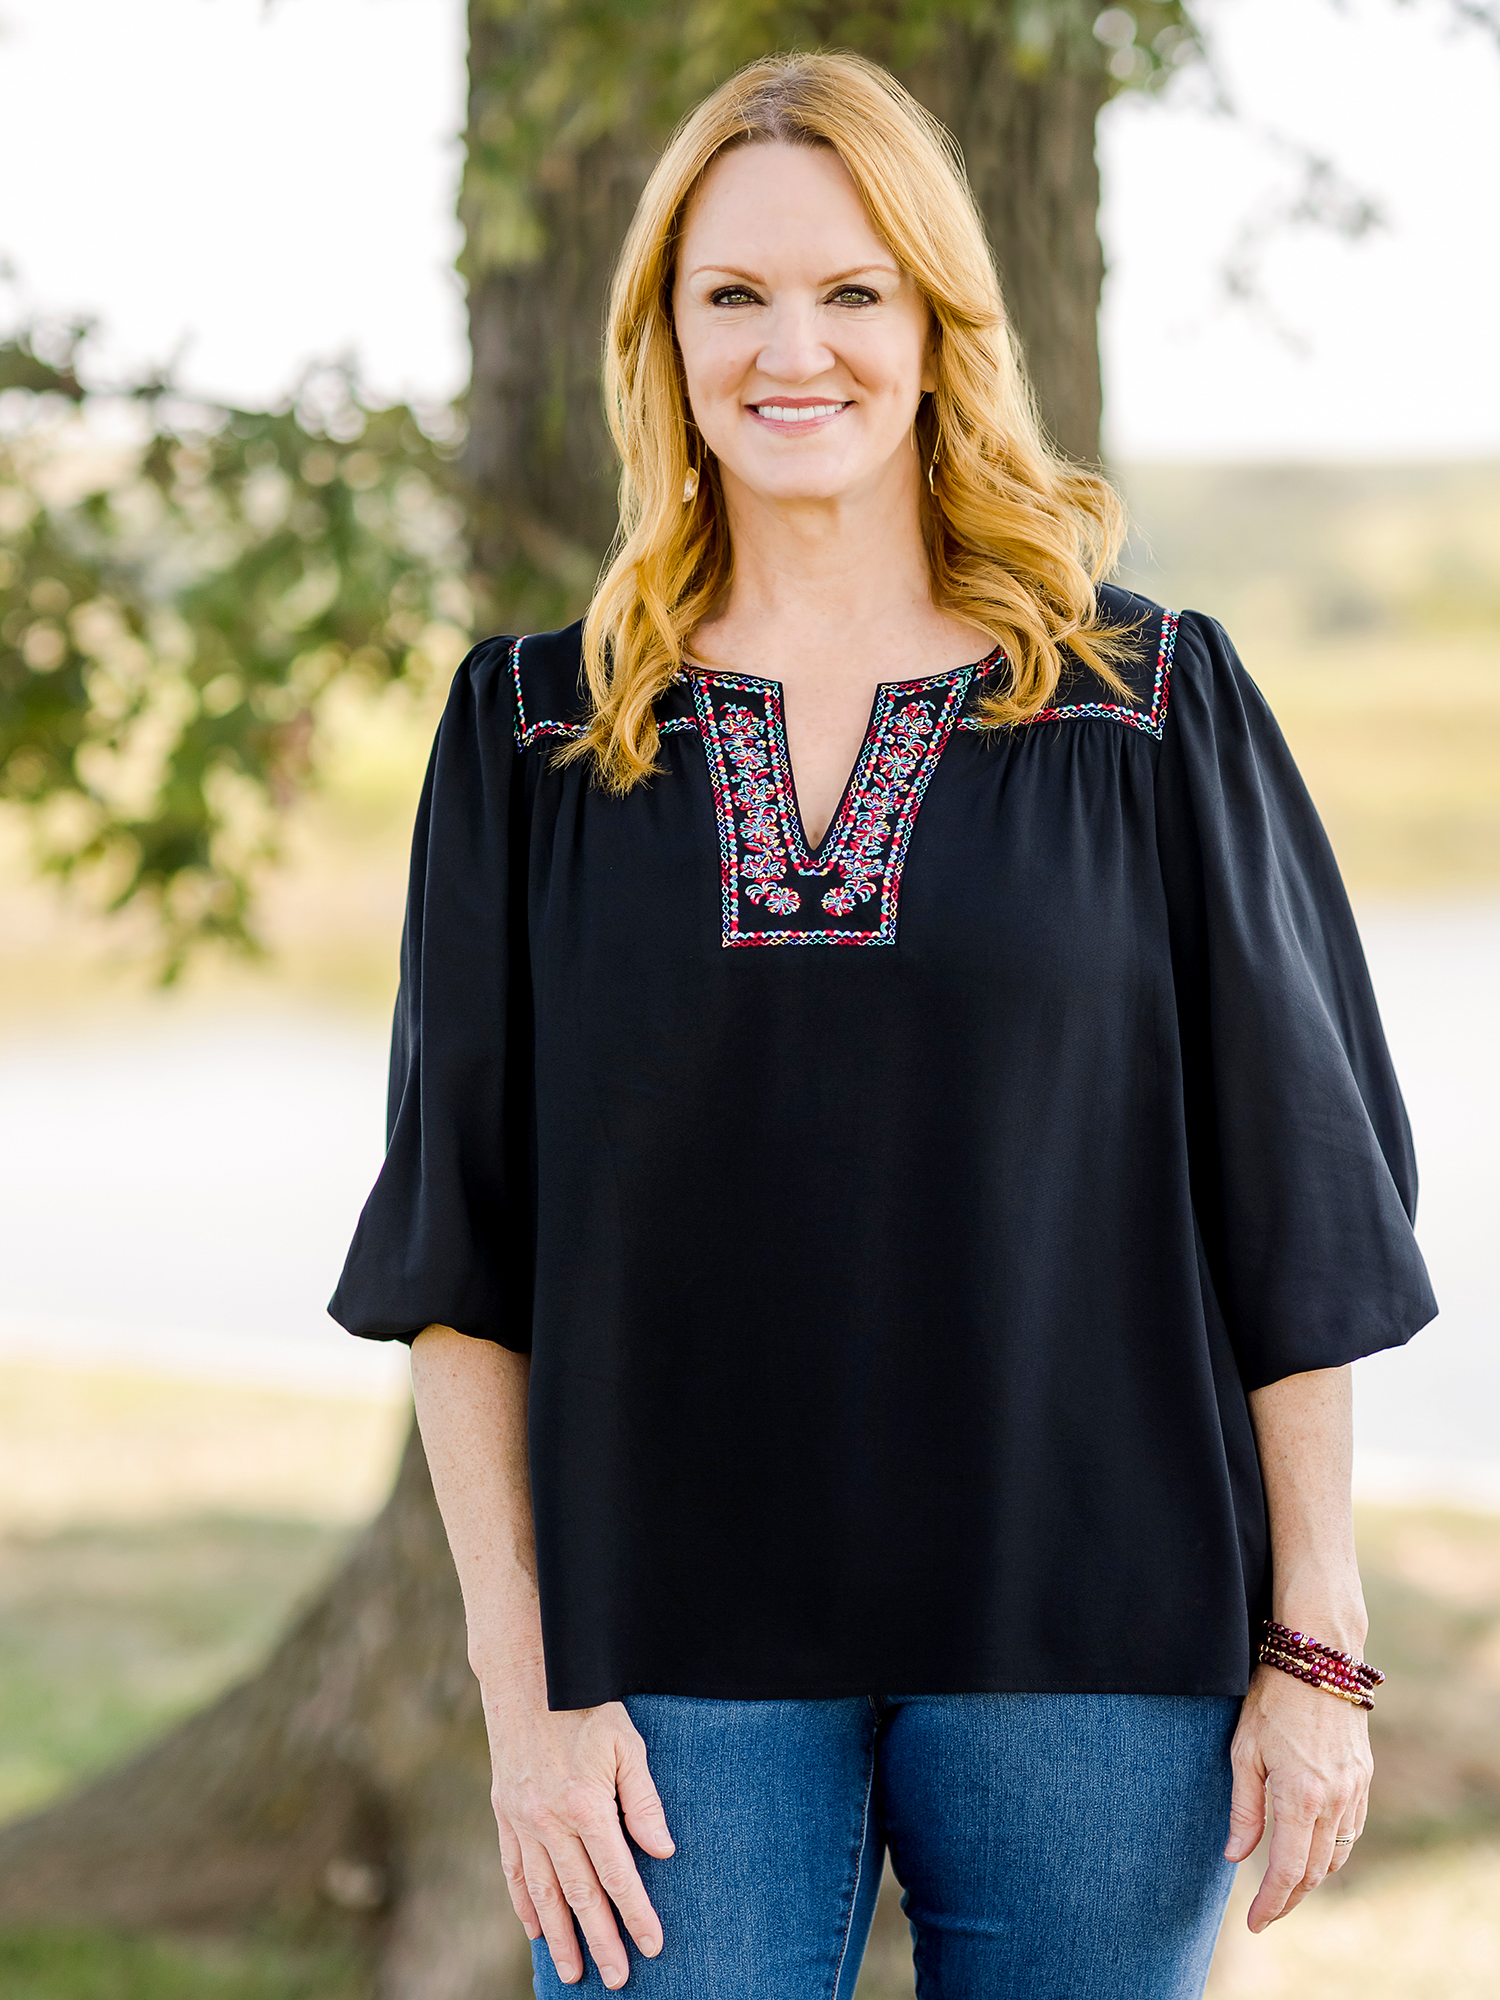 Ree Drummond, the Pioneer Woman, on Casseroles and Cooking for an Empty  Nest – Garden & Gun